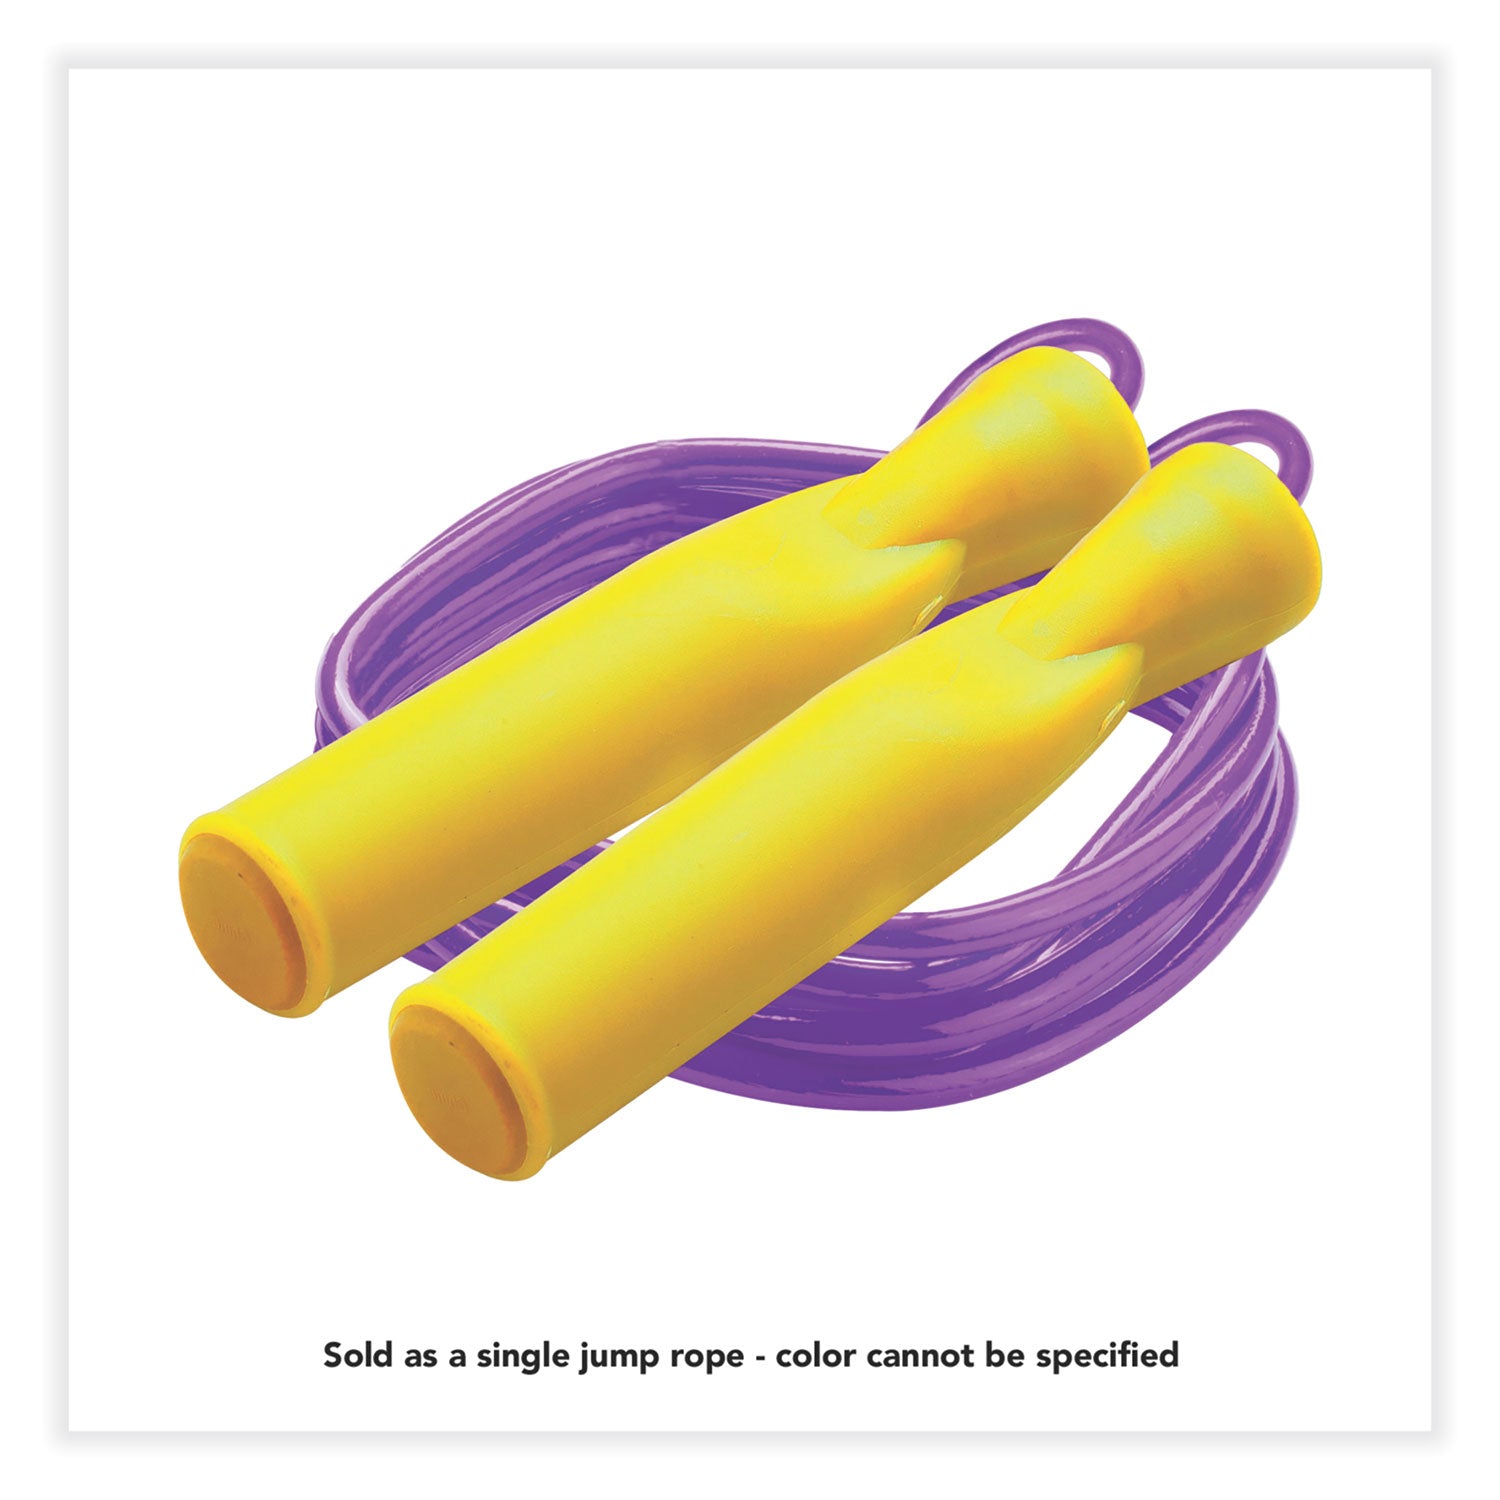 ball-bearing-speed-rope-8-ft-randomly-assorted-colors_csibsr8 - 4